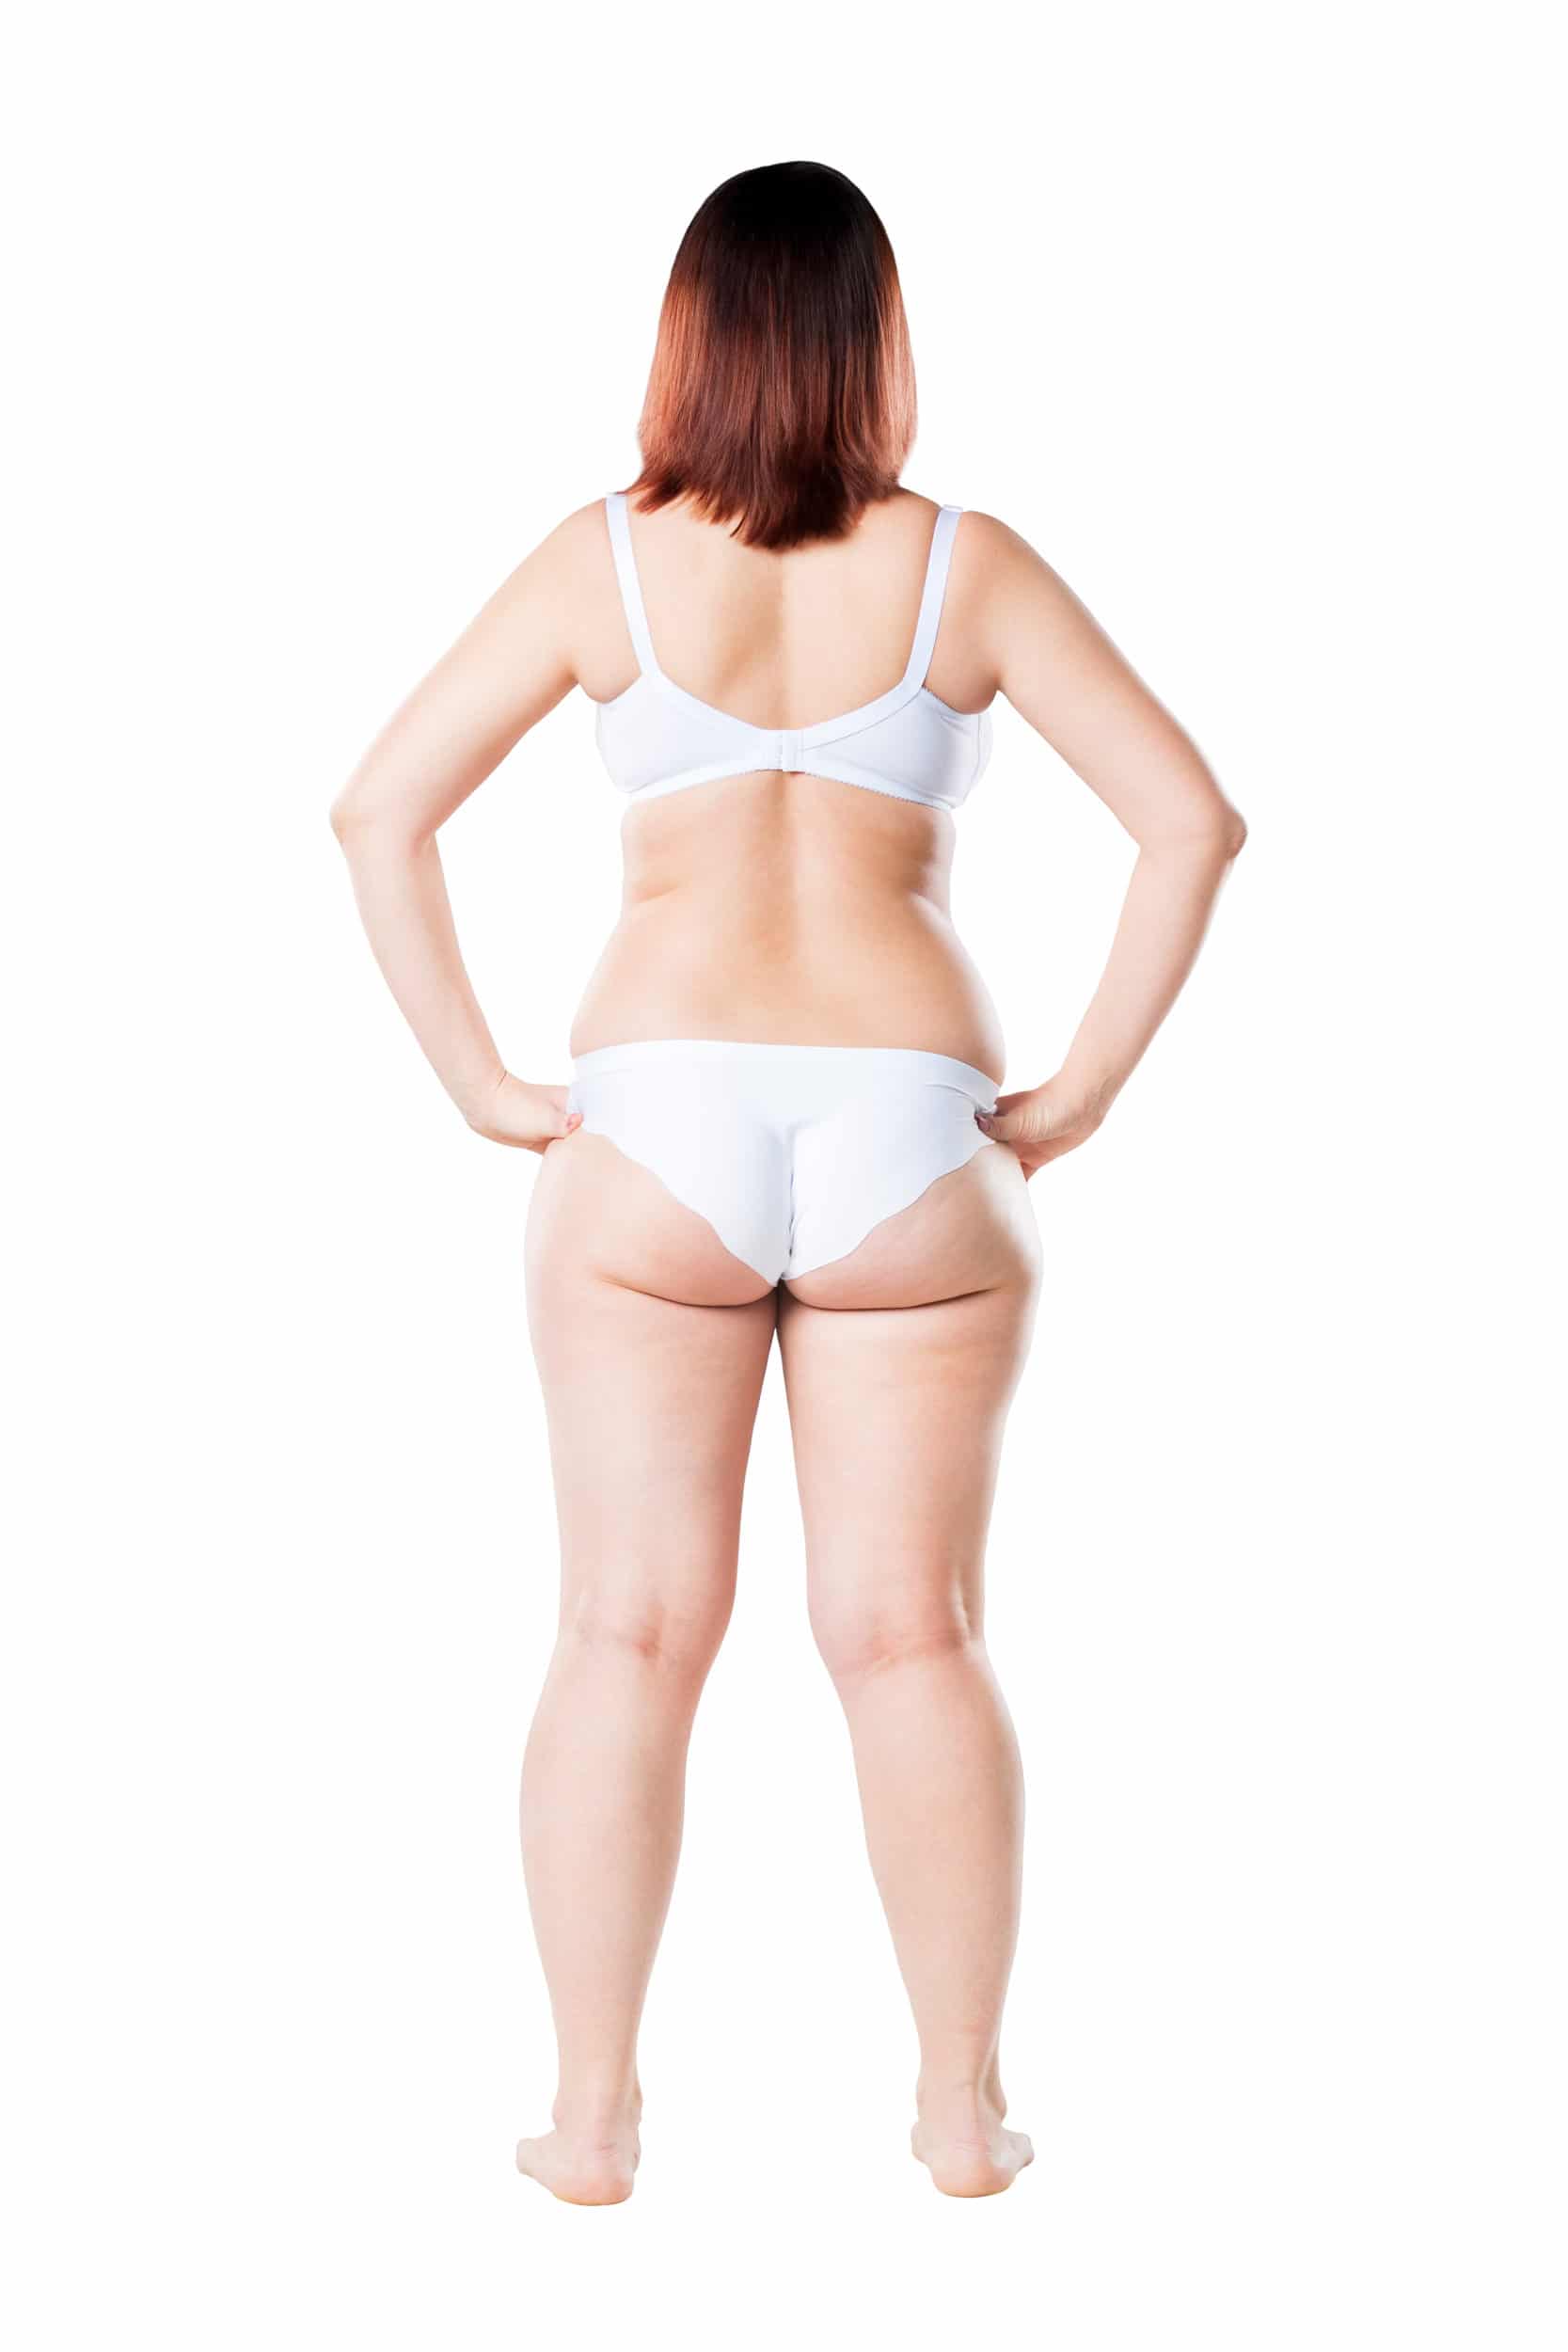 Fat woman in underwear isolated on white studio background, cellulite on female body